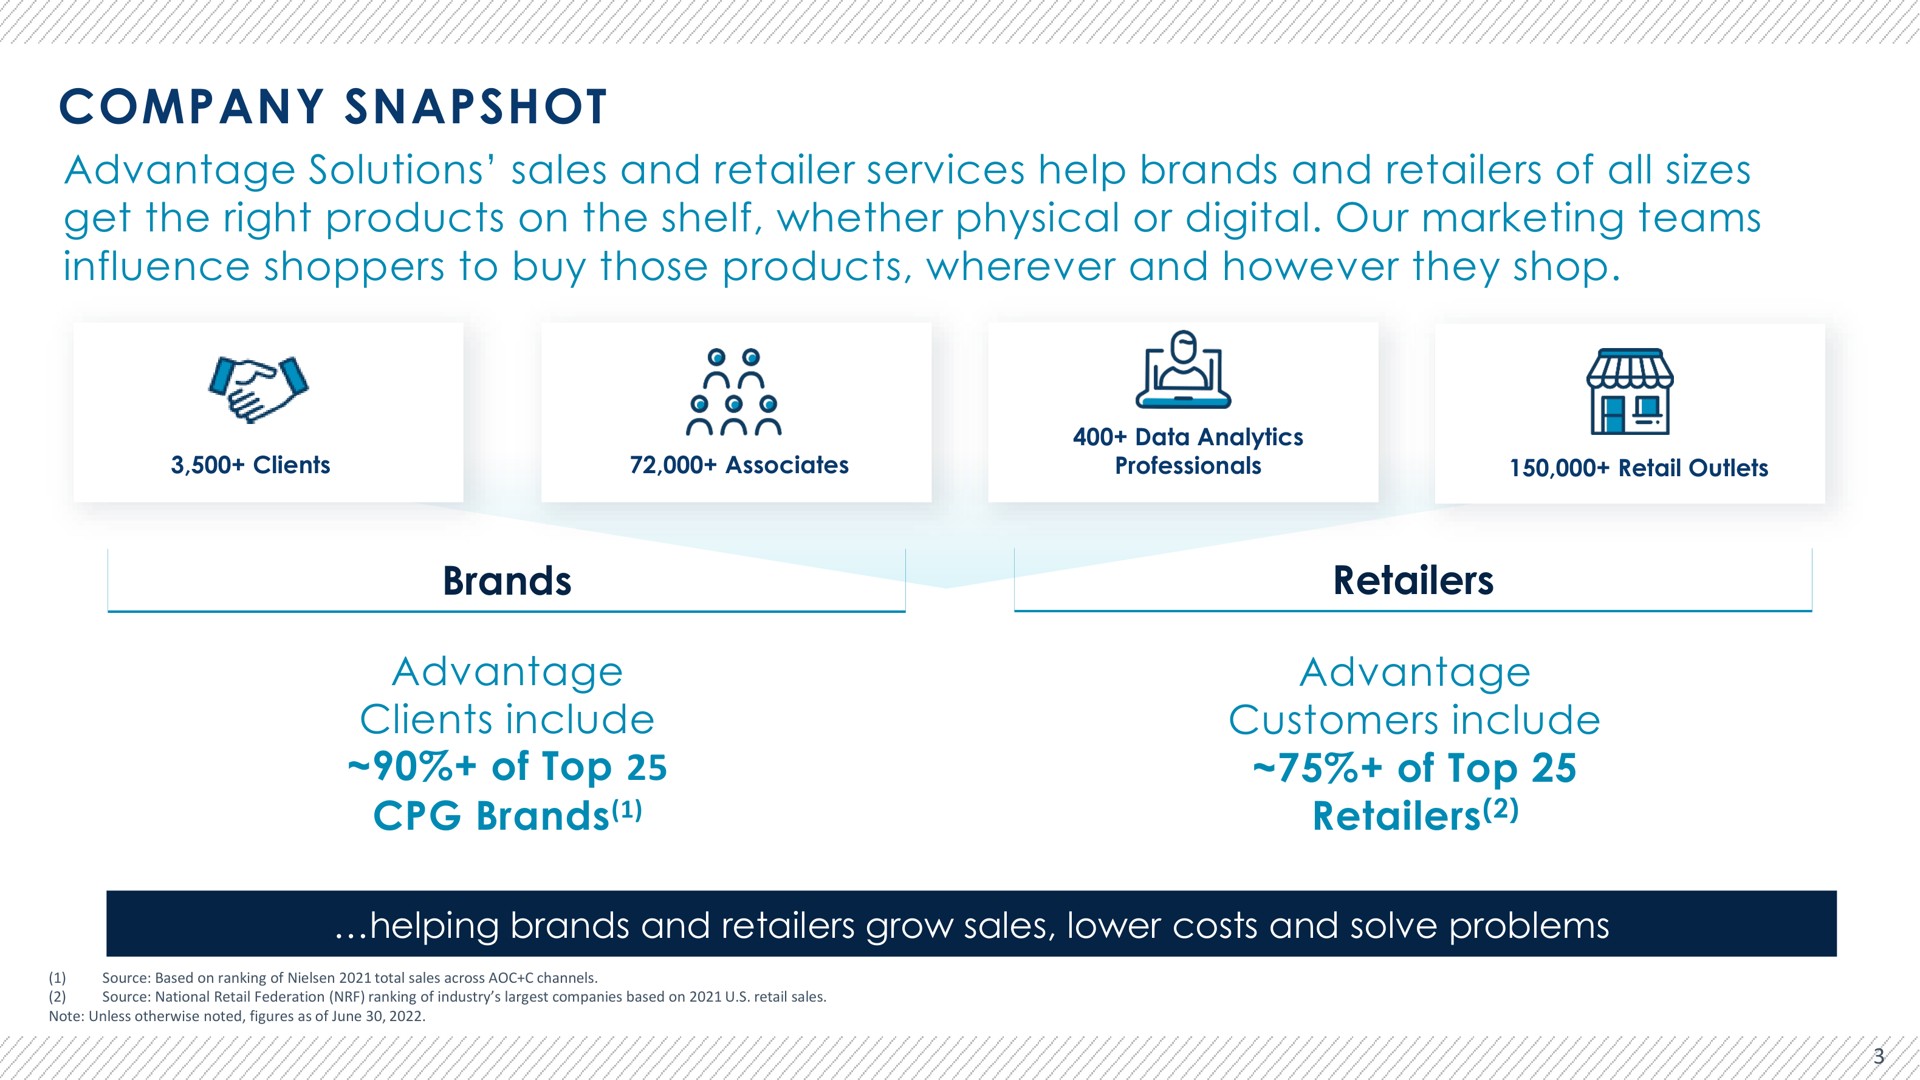 company snapshot advantage solutions sales and retailer services help brands and retailers of all sizes get the right products on the shelf whether physical or digital our marketing teams influence shoppers to buy those products wherever and however they shop brands advantage clients include of top brands retailers advantage customers include of top retailers helping brands and retailers grow sales lower costs and solve problems a | Advantage Solutions